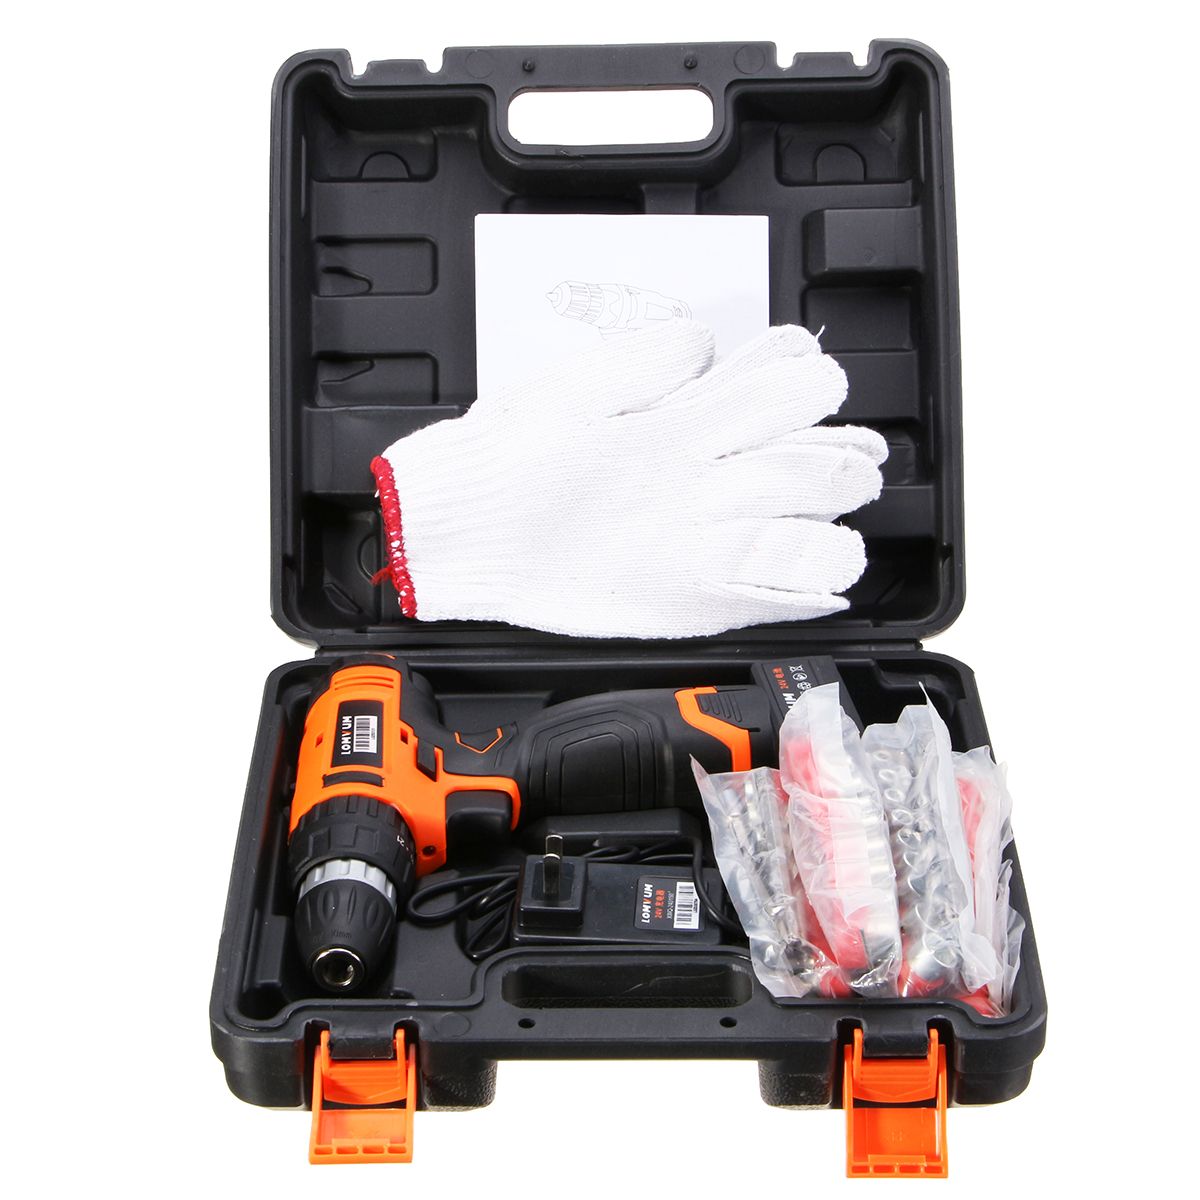 220V-8724ST-Drill-Multifunction-Battery-Electric-Screwdriver-Rechargeable-Tool-1234417